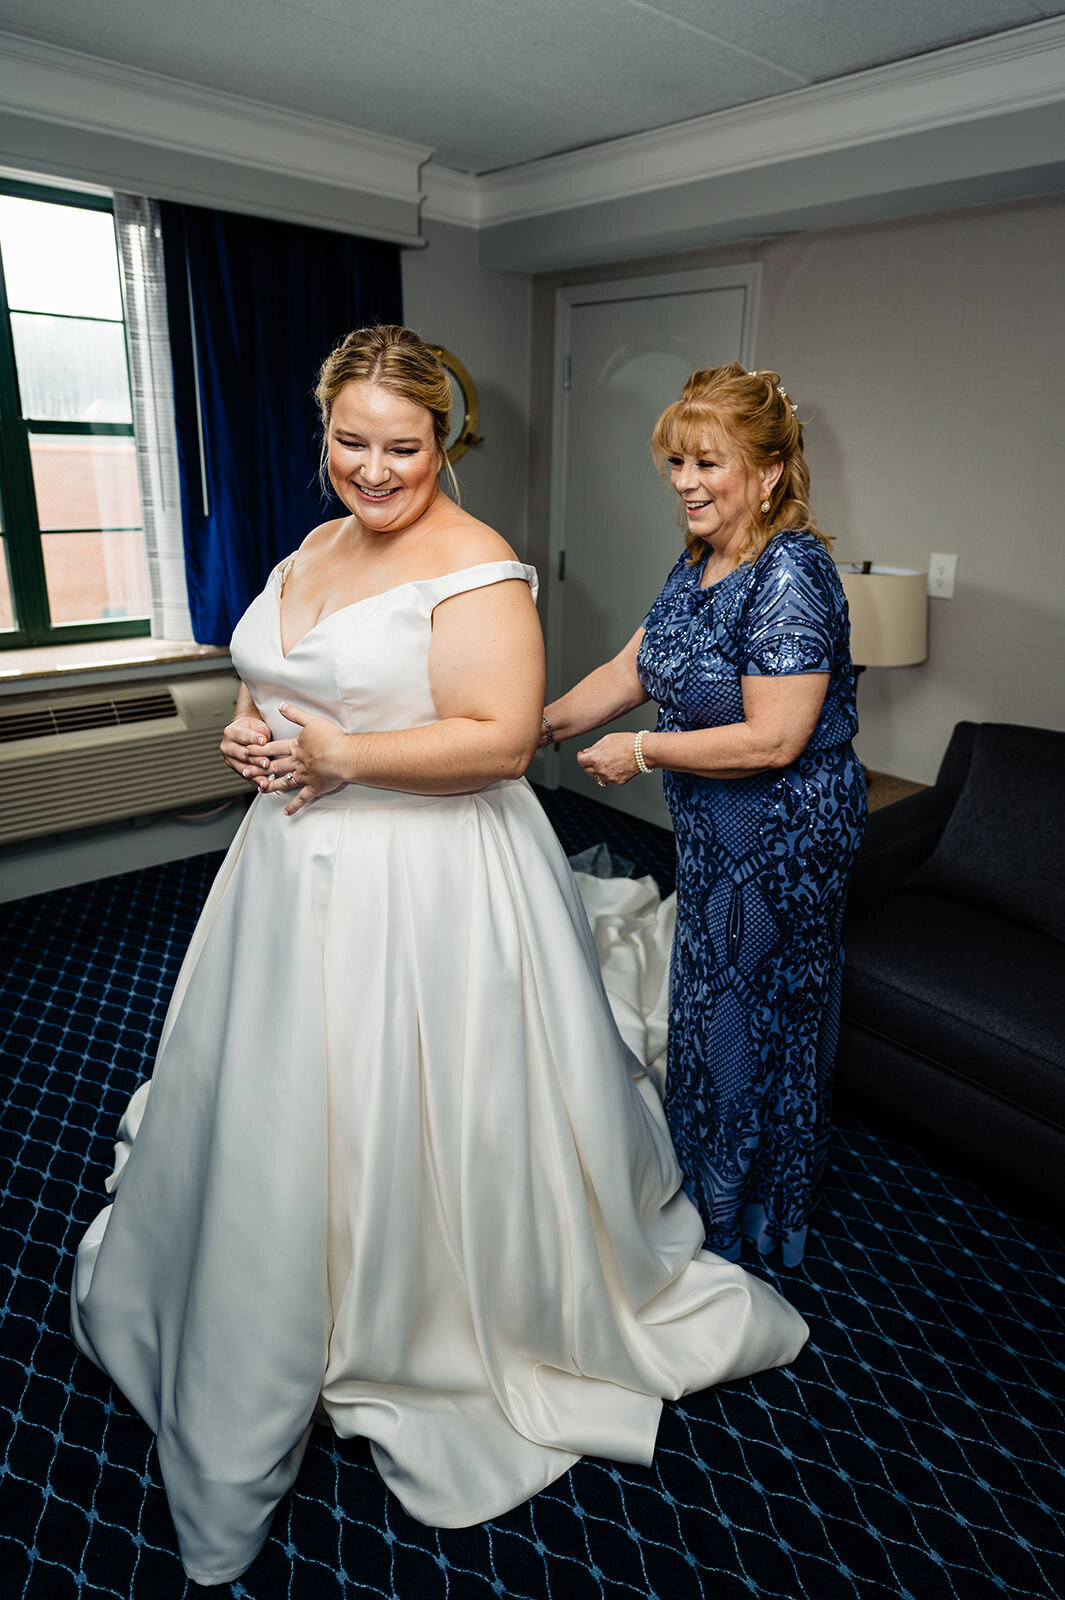 A smiling woman in a wedding gown being assisted by another woman in a blue lace dress